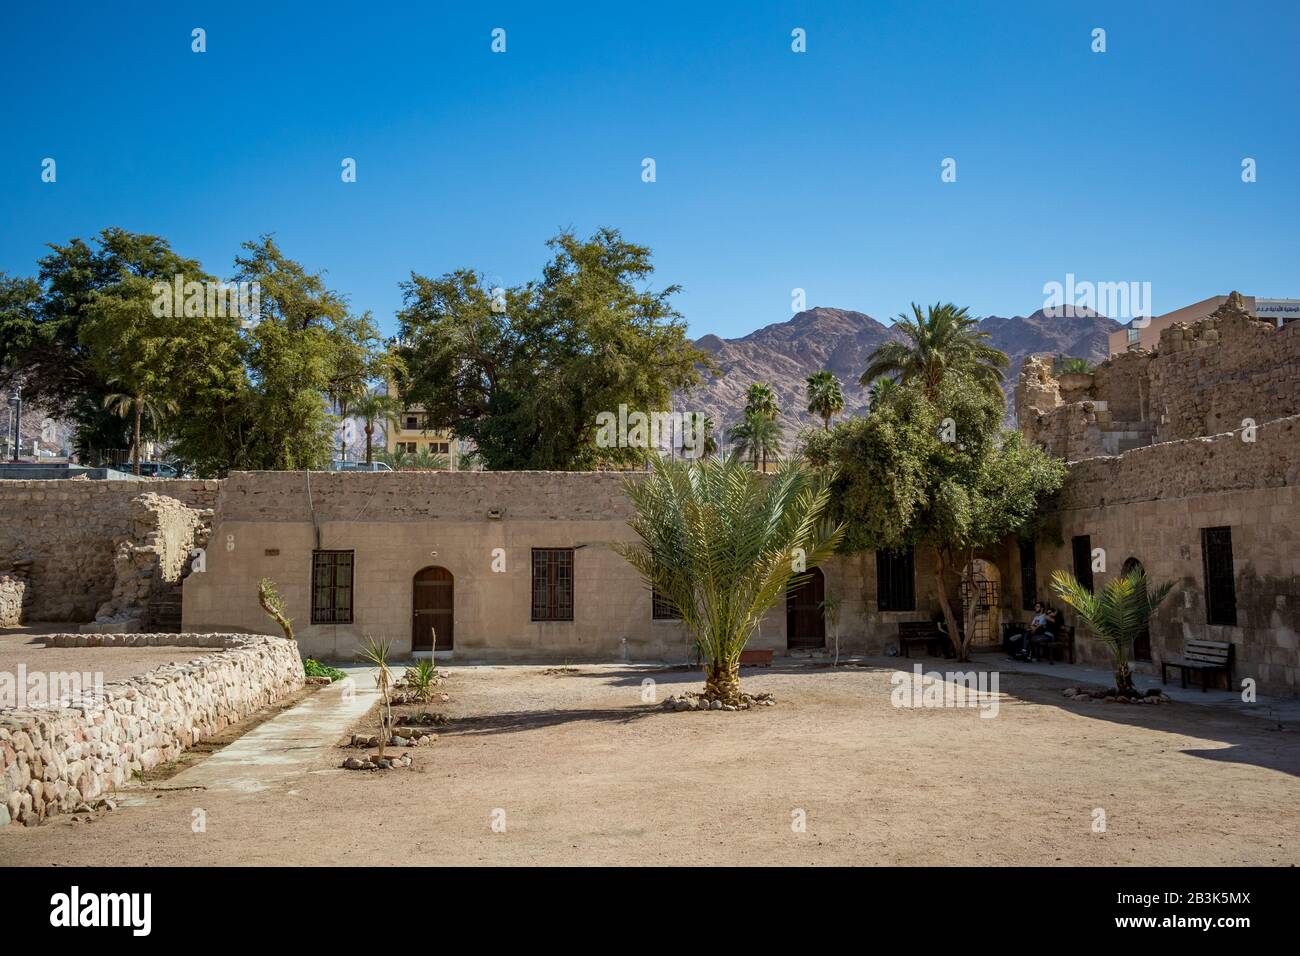 AQABA, JORDAN - JANUARY 31, 2020: Tourists rest under fortress walls shadows. Court yard view of Aqaba Castle. Main fort square is empty under the sunlight. Sunny winter day. Clear cloudless blue sky Stock Photo